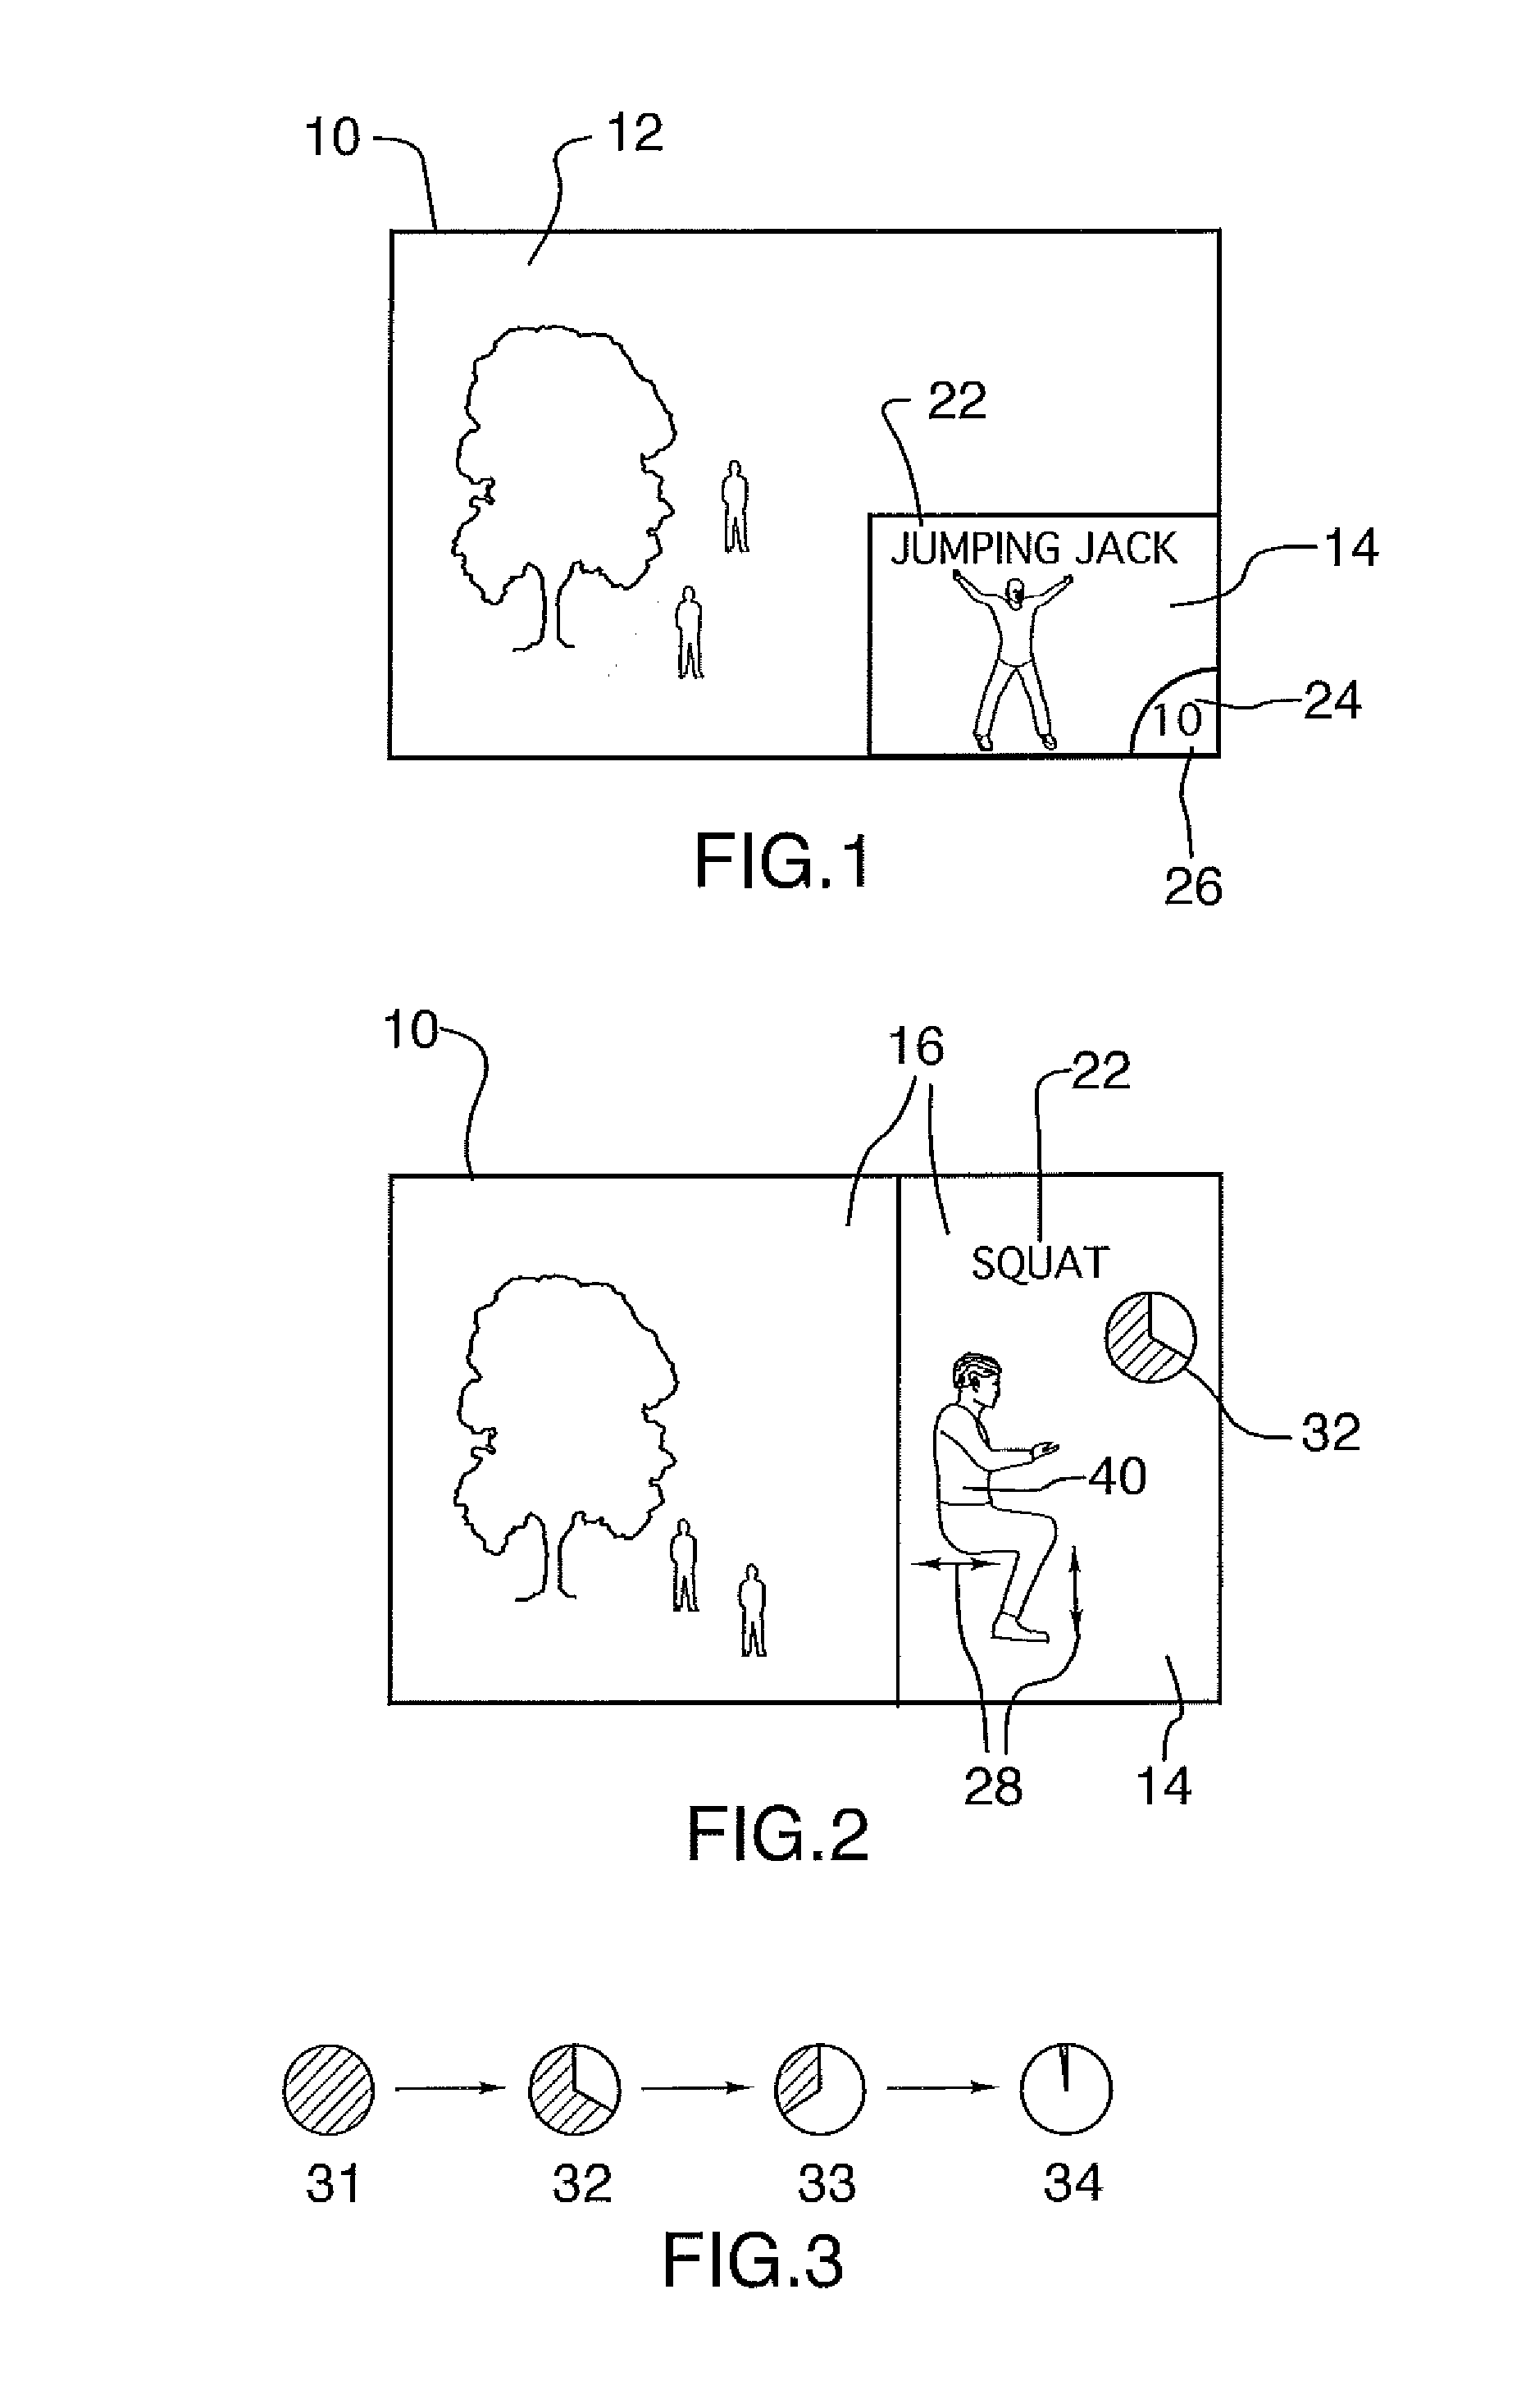 Method and apparatus to convey visual physical activity instructions on a video screen